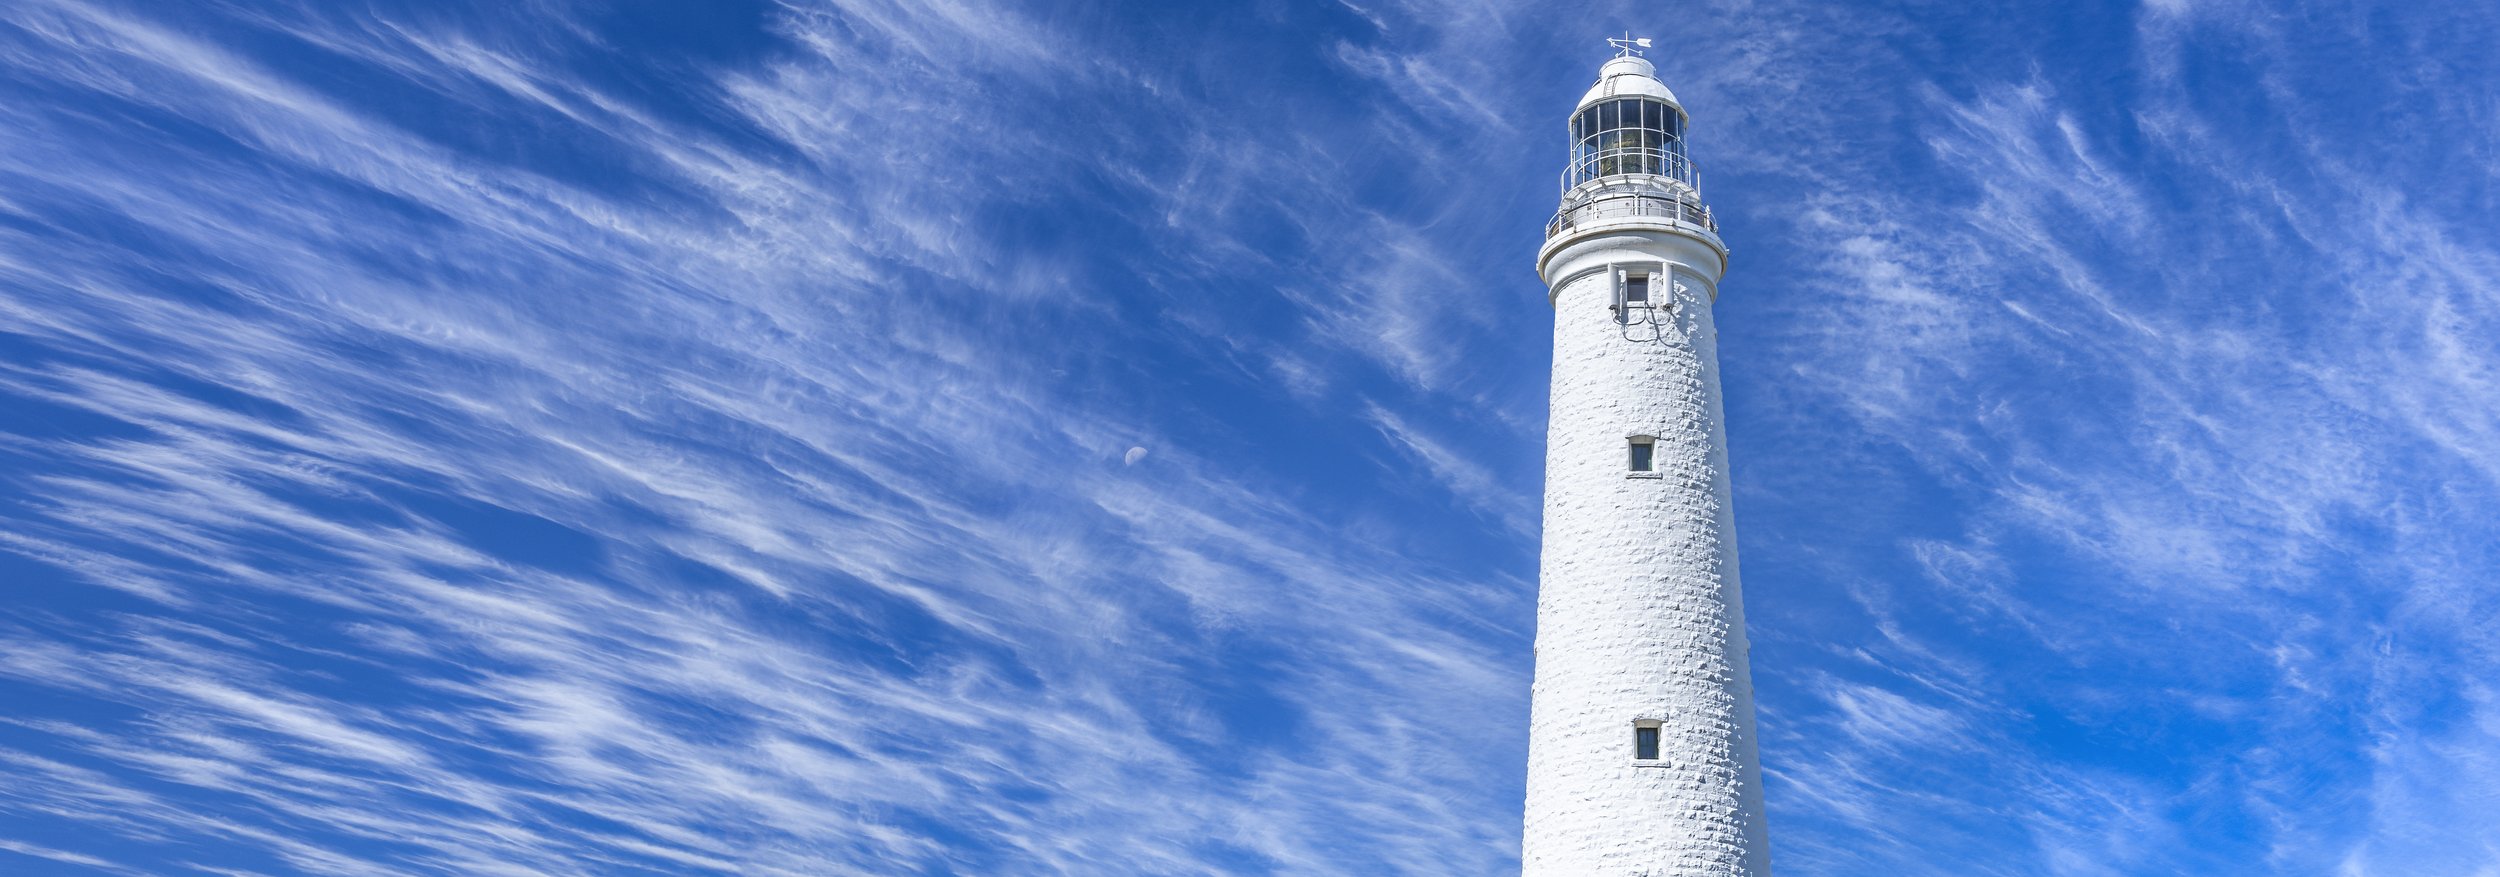 WADJEMUP LIGHTHOUSE - ROTTNEST DREAMING from $255 AUD